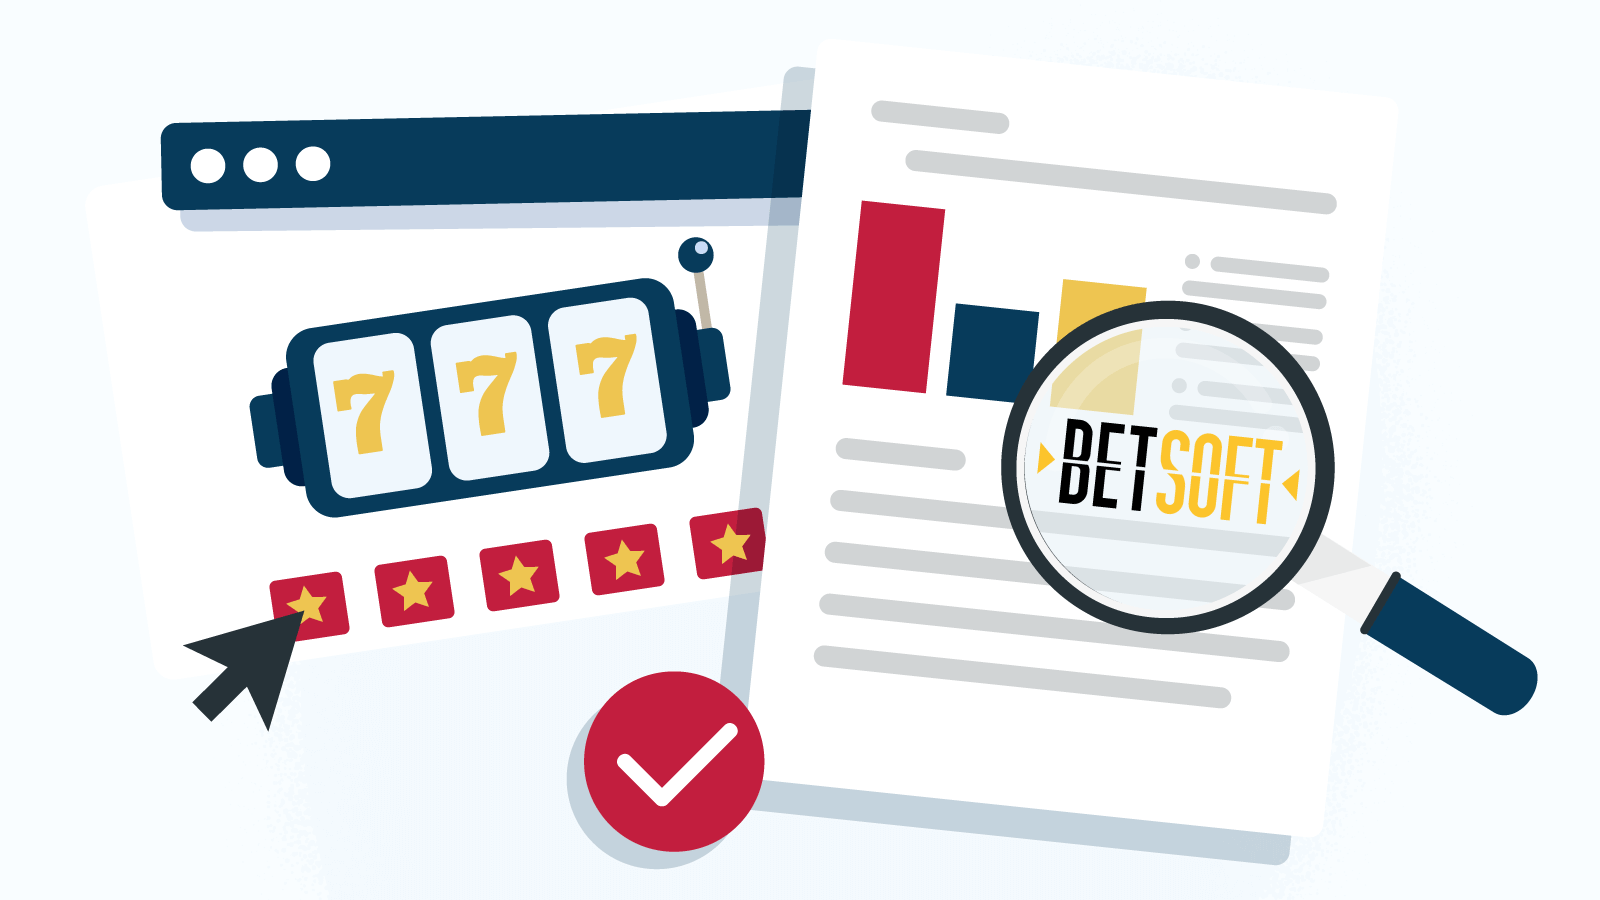 How We Select New Betsoft Casinos